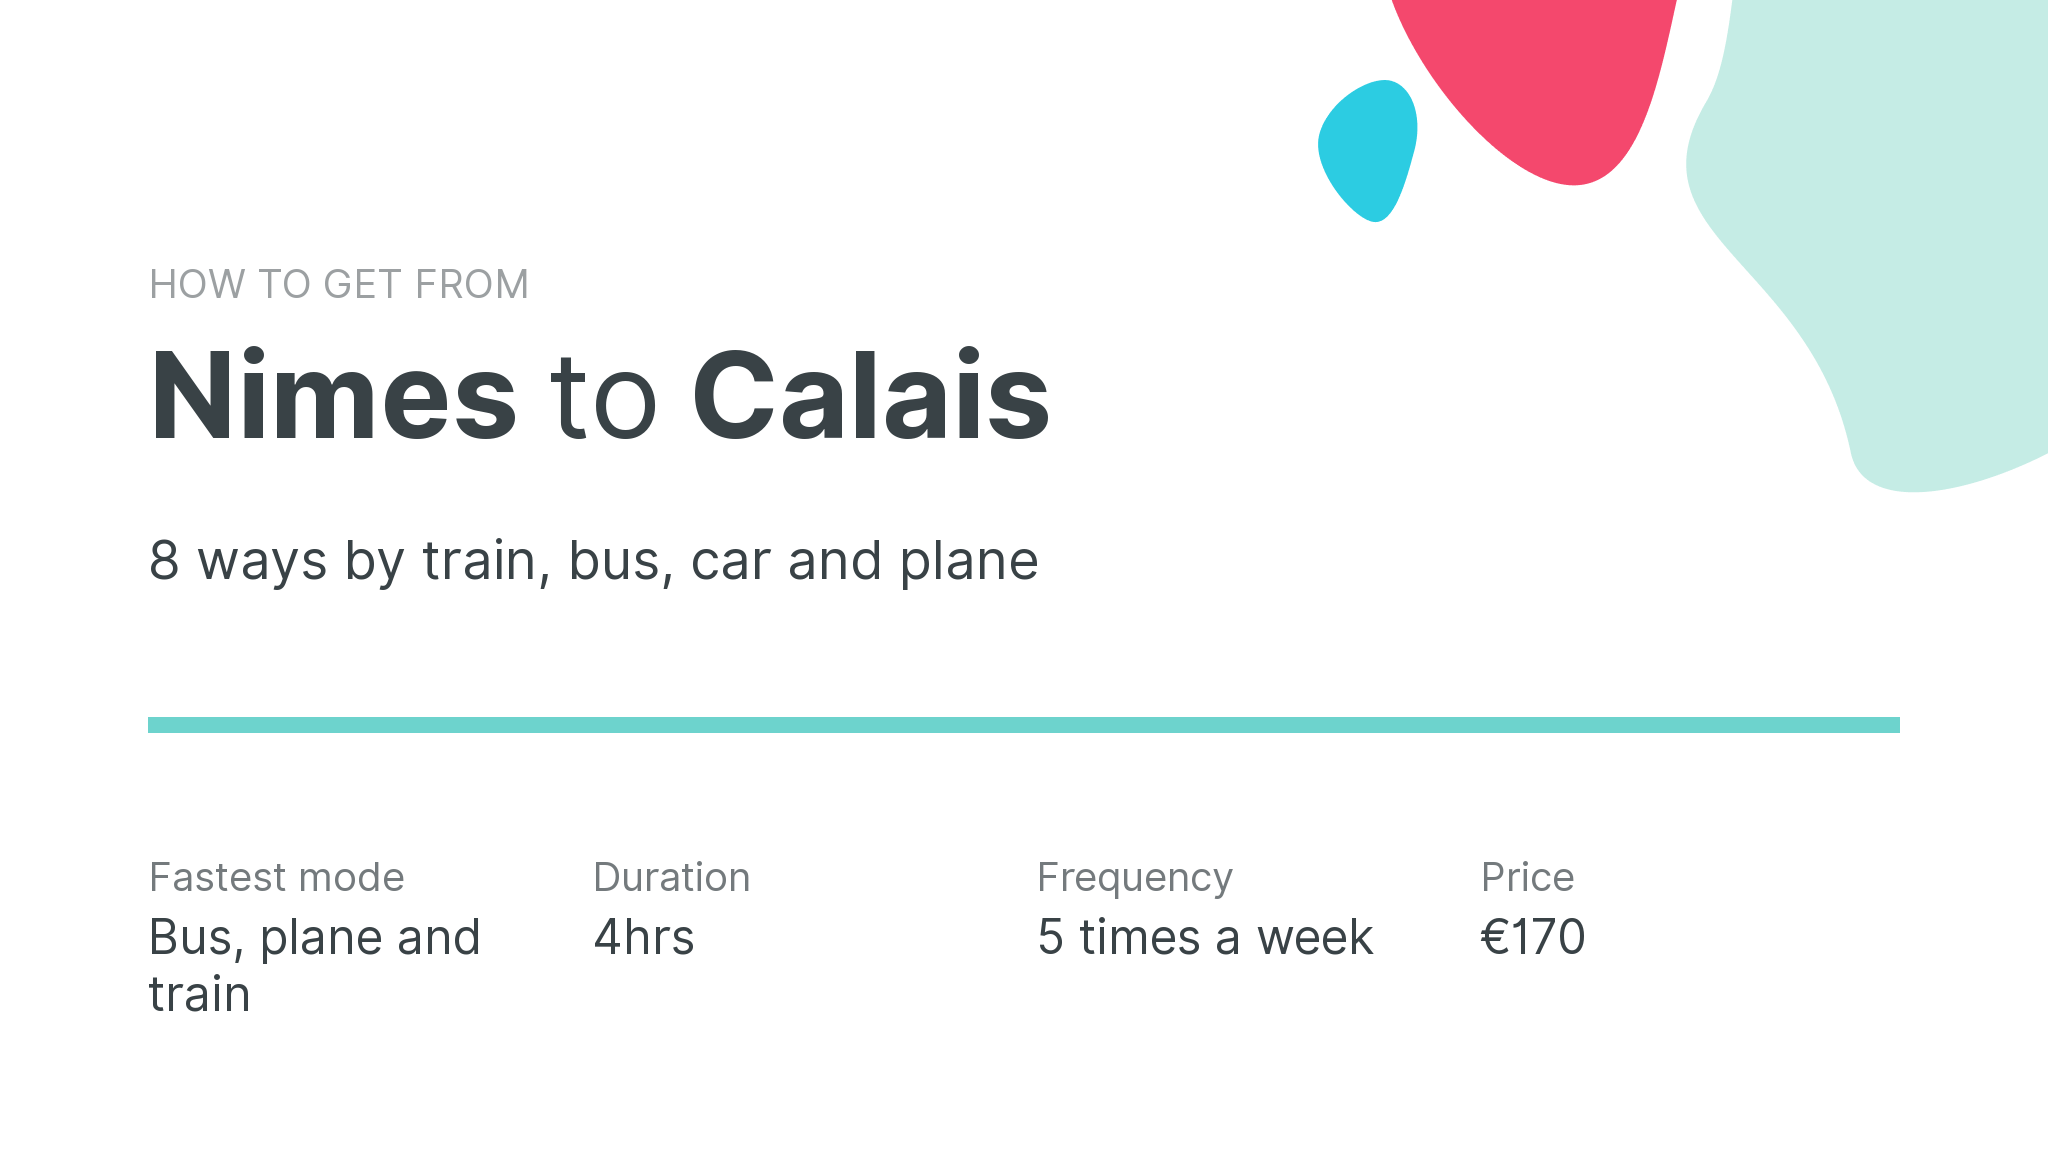 How do I get from Nimes to Calais